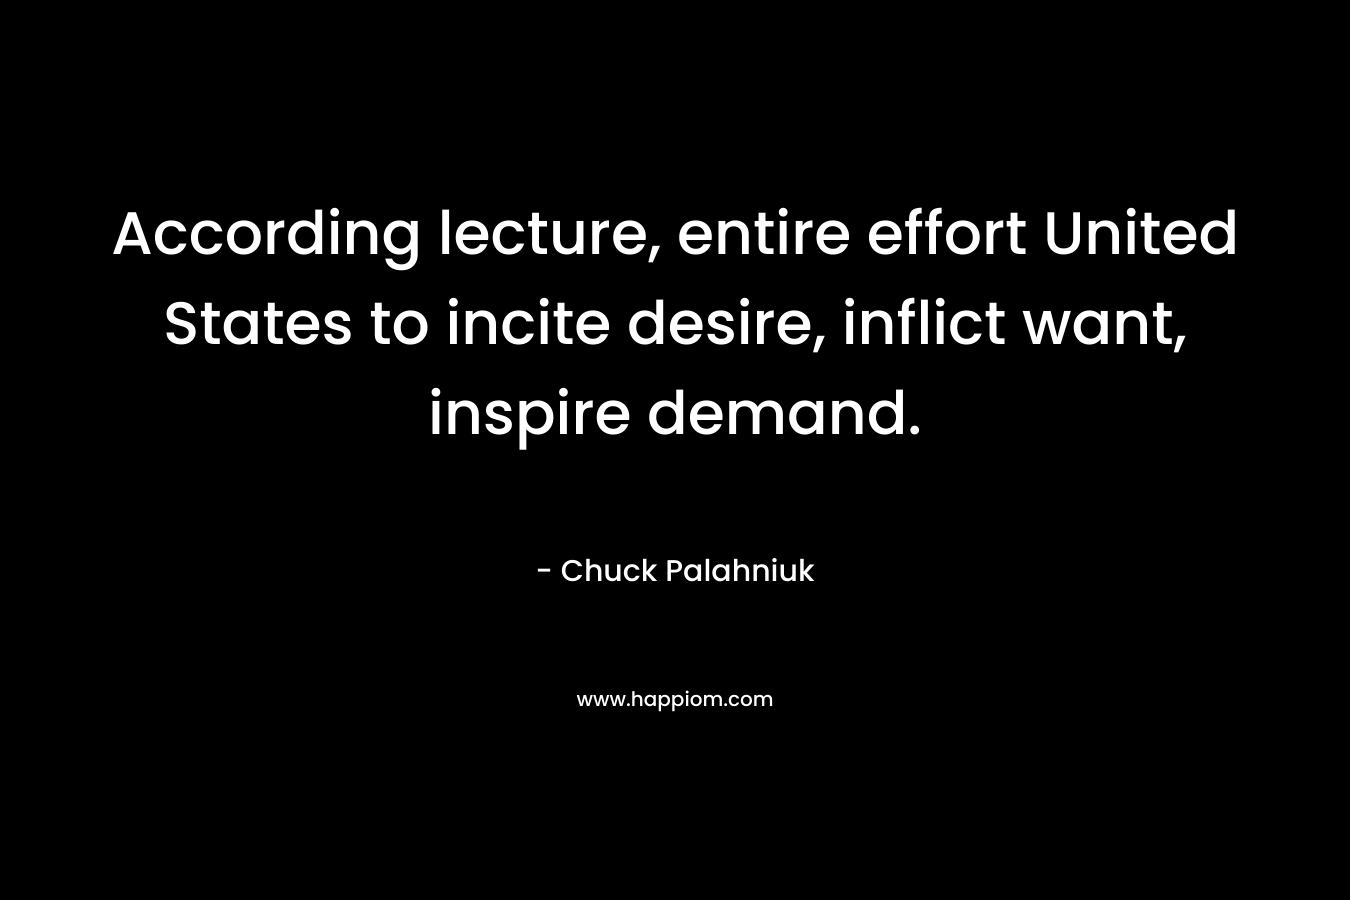 According lecture, entire effort United States to incite desire, inflict want, inspire demand.